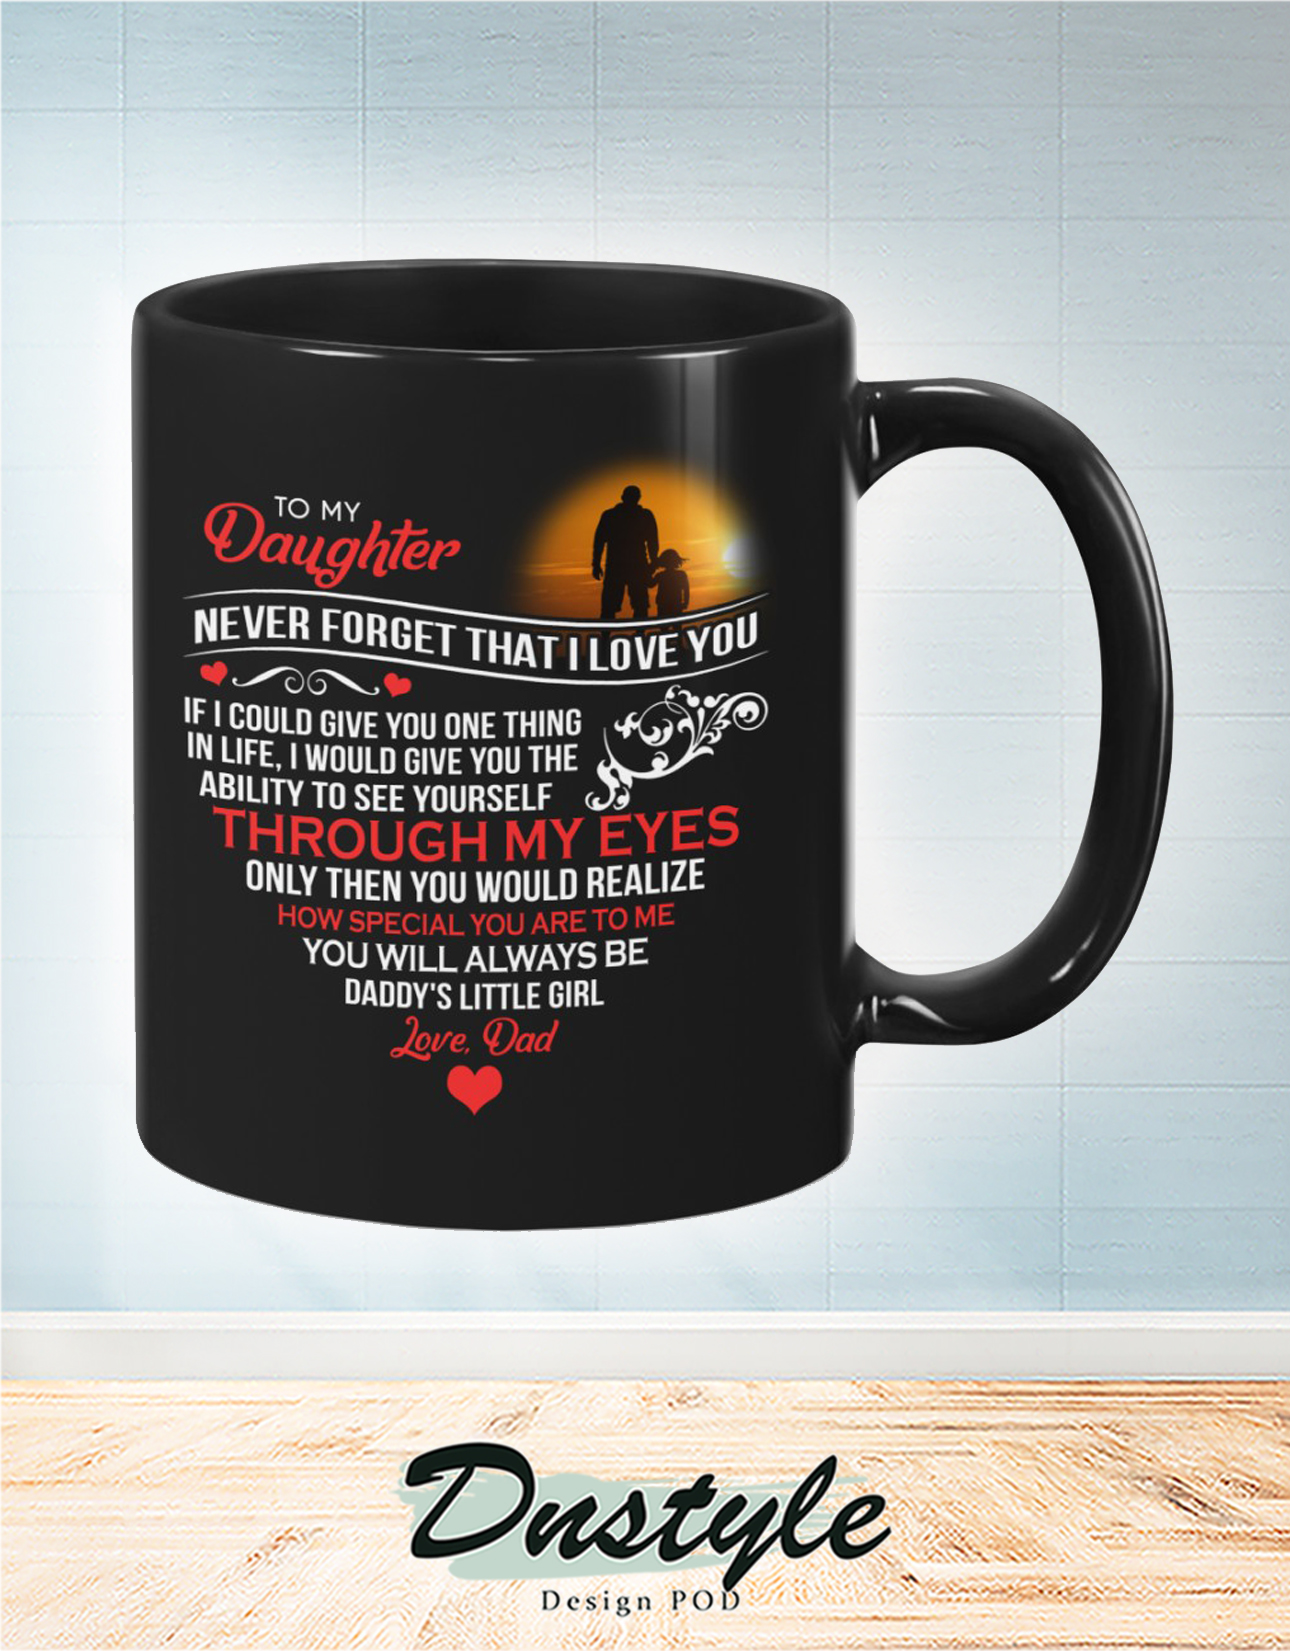 To my daughter never forget that I love you dad black mug